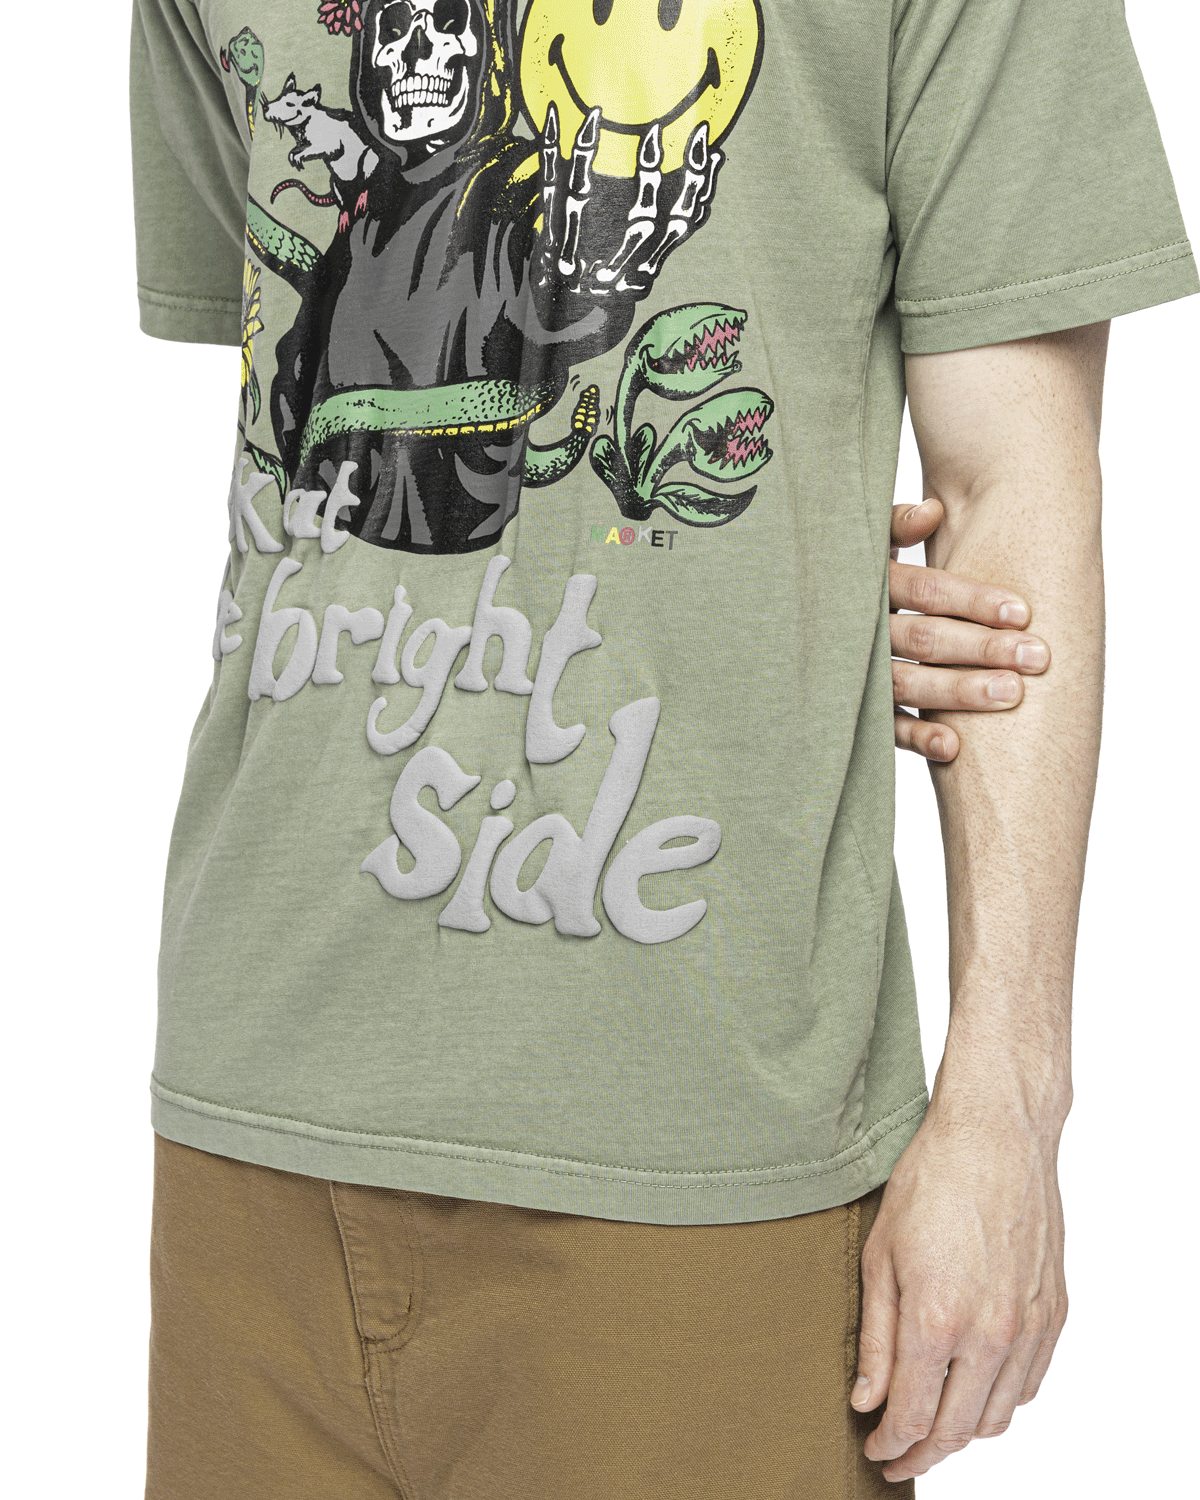 Smiley Look At The Bright Side Tee